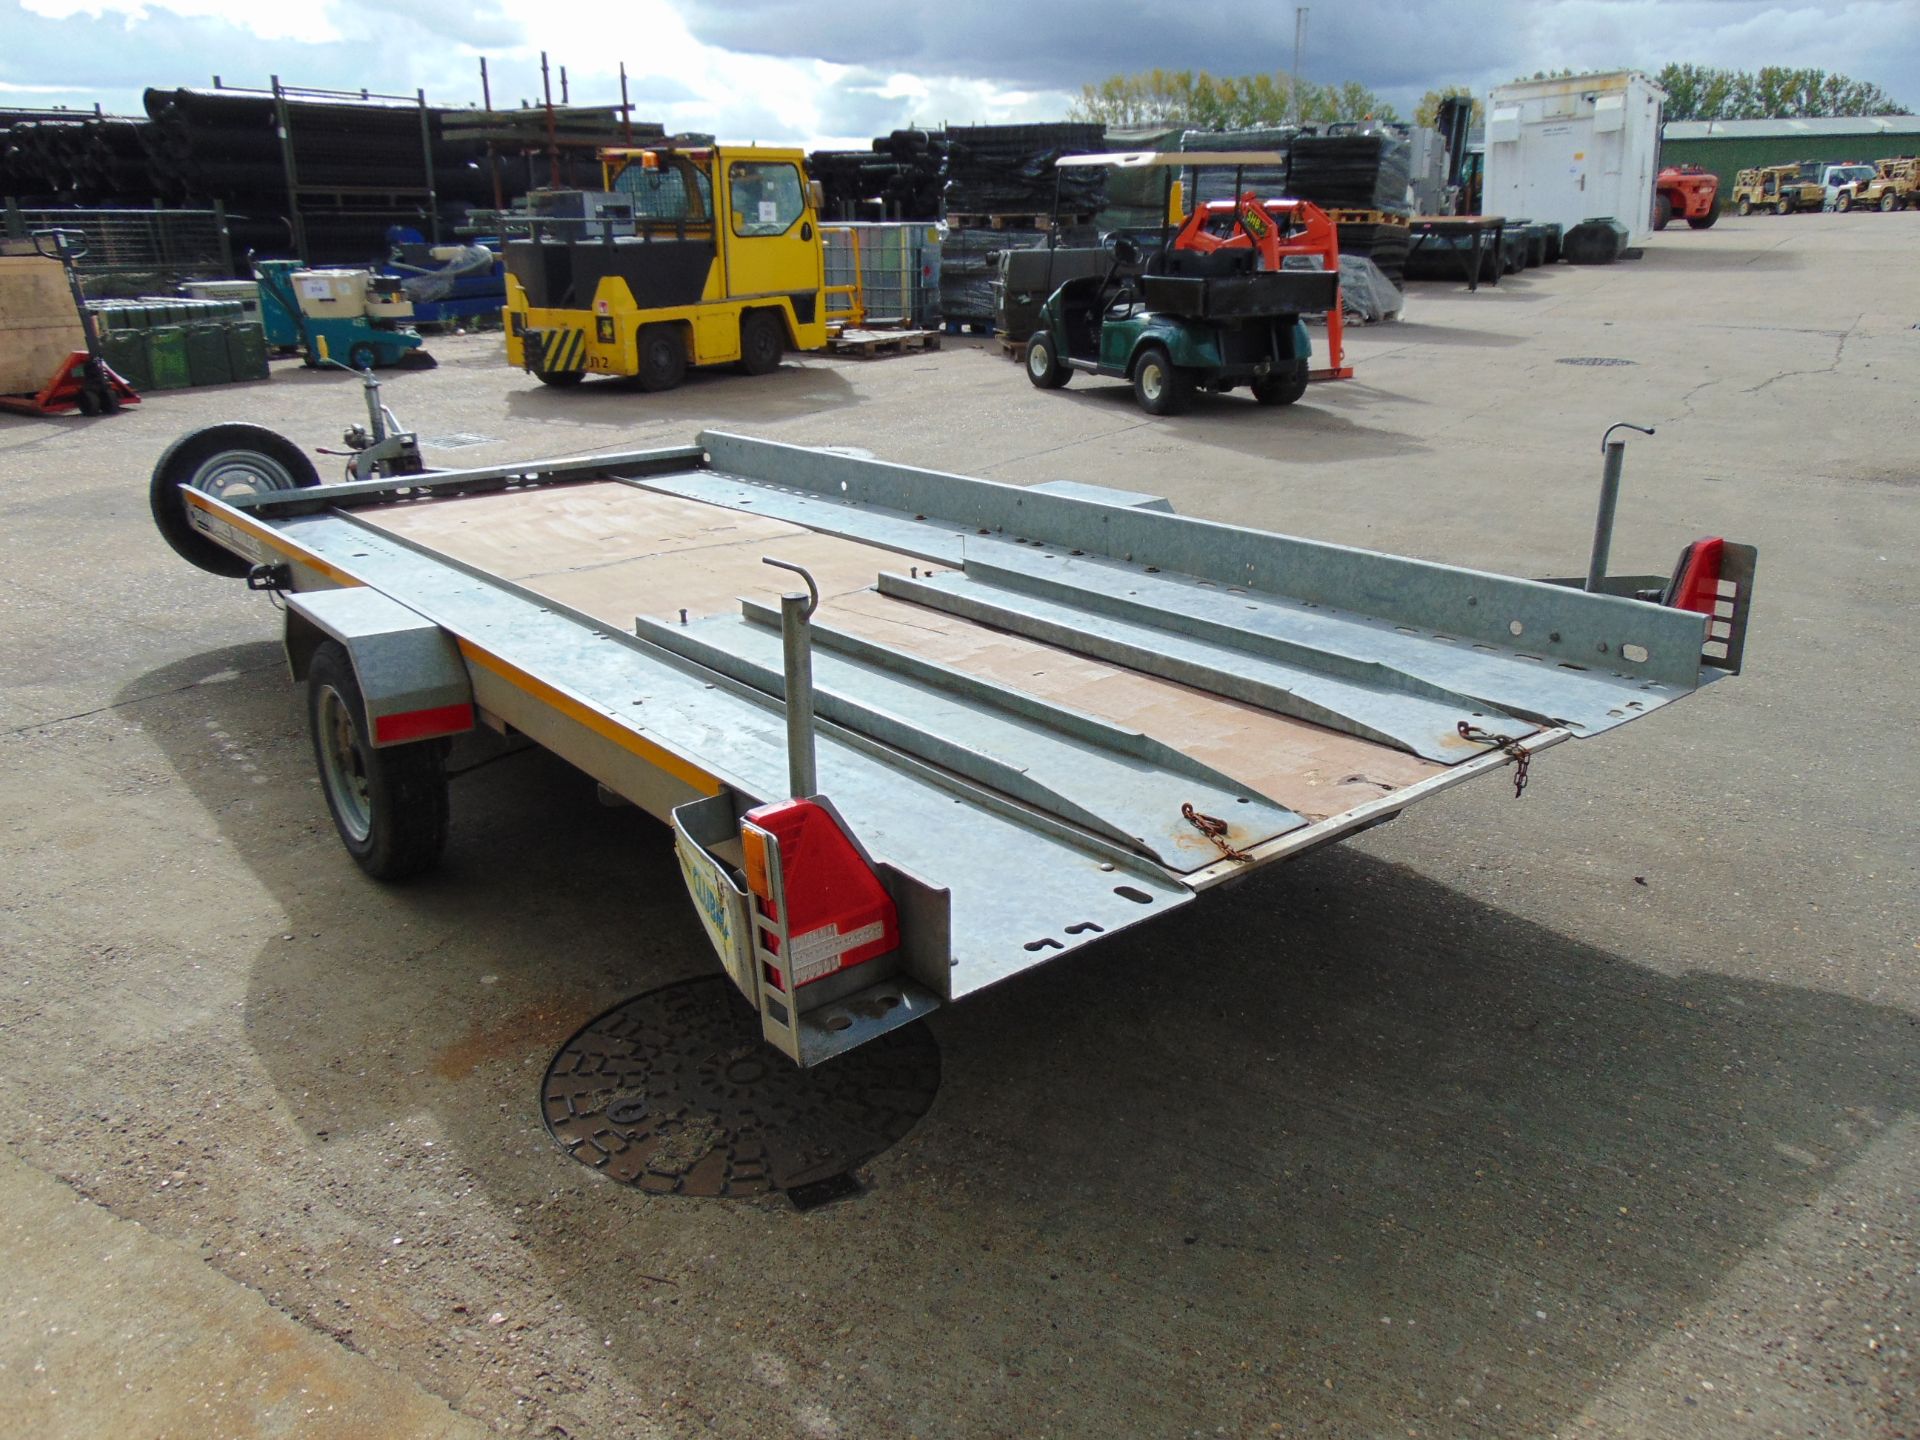 Brian James Clubman Single Axle Car Transporter Trailer with Ramps - Image 5 of 17